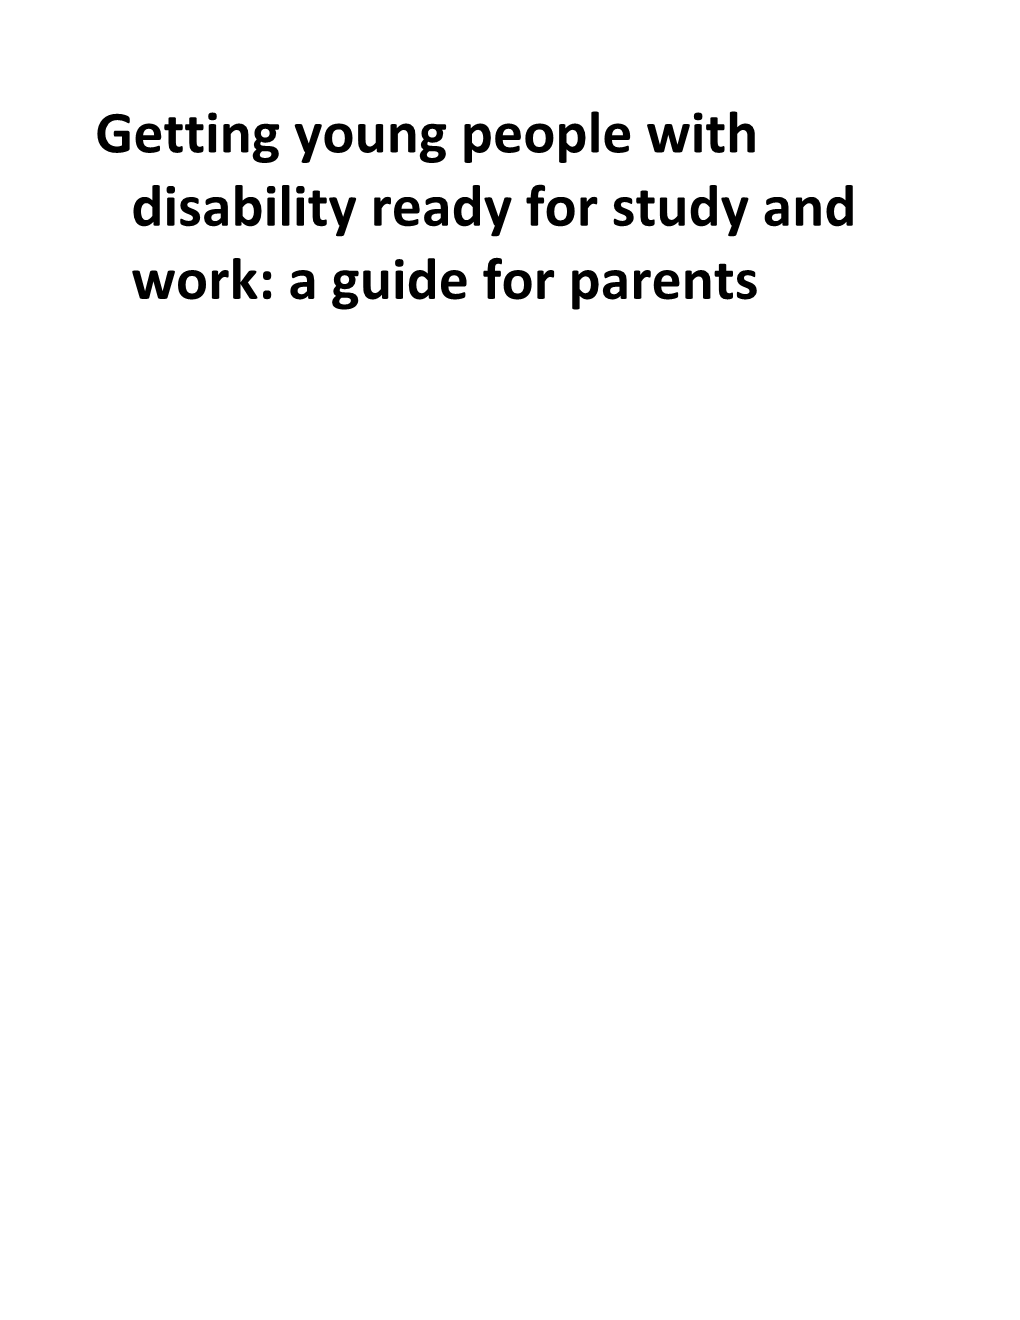 Getting Young People with Disabilityready for Study and Work: a Guide for Parents